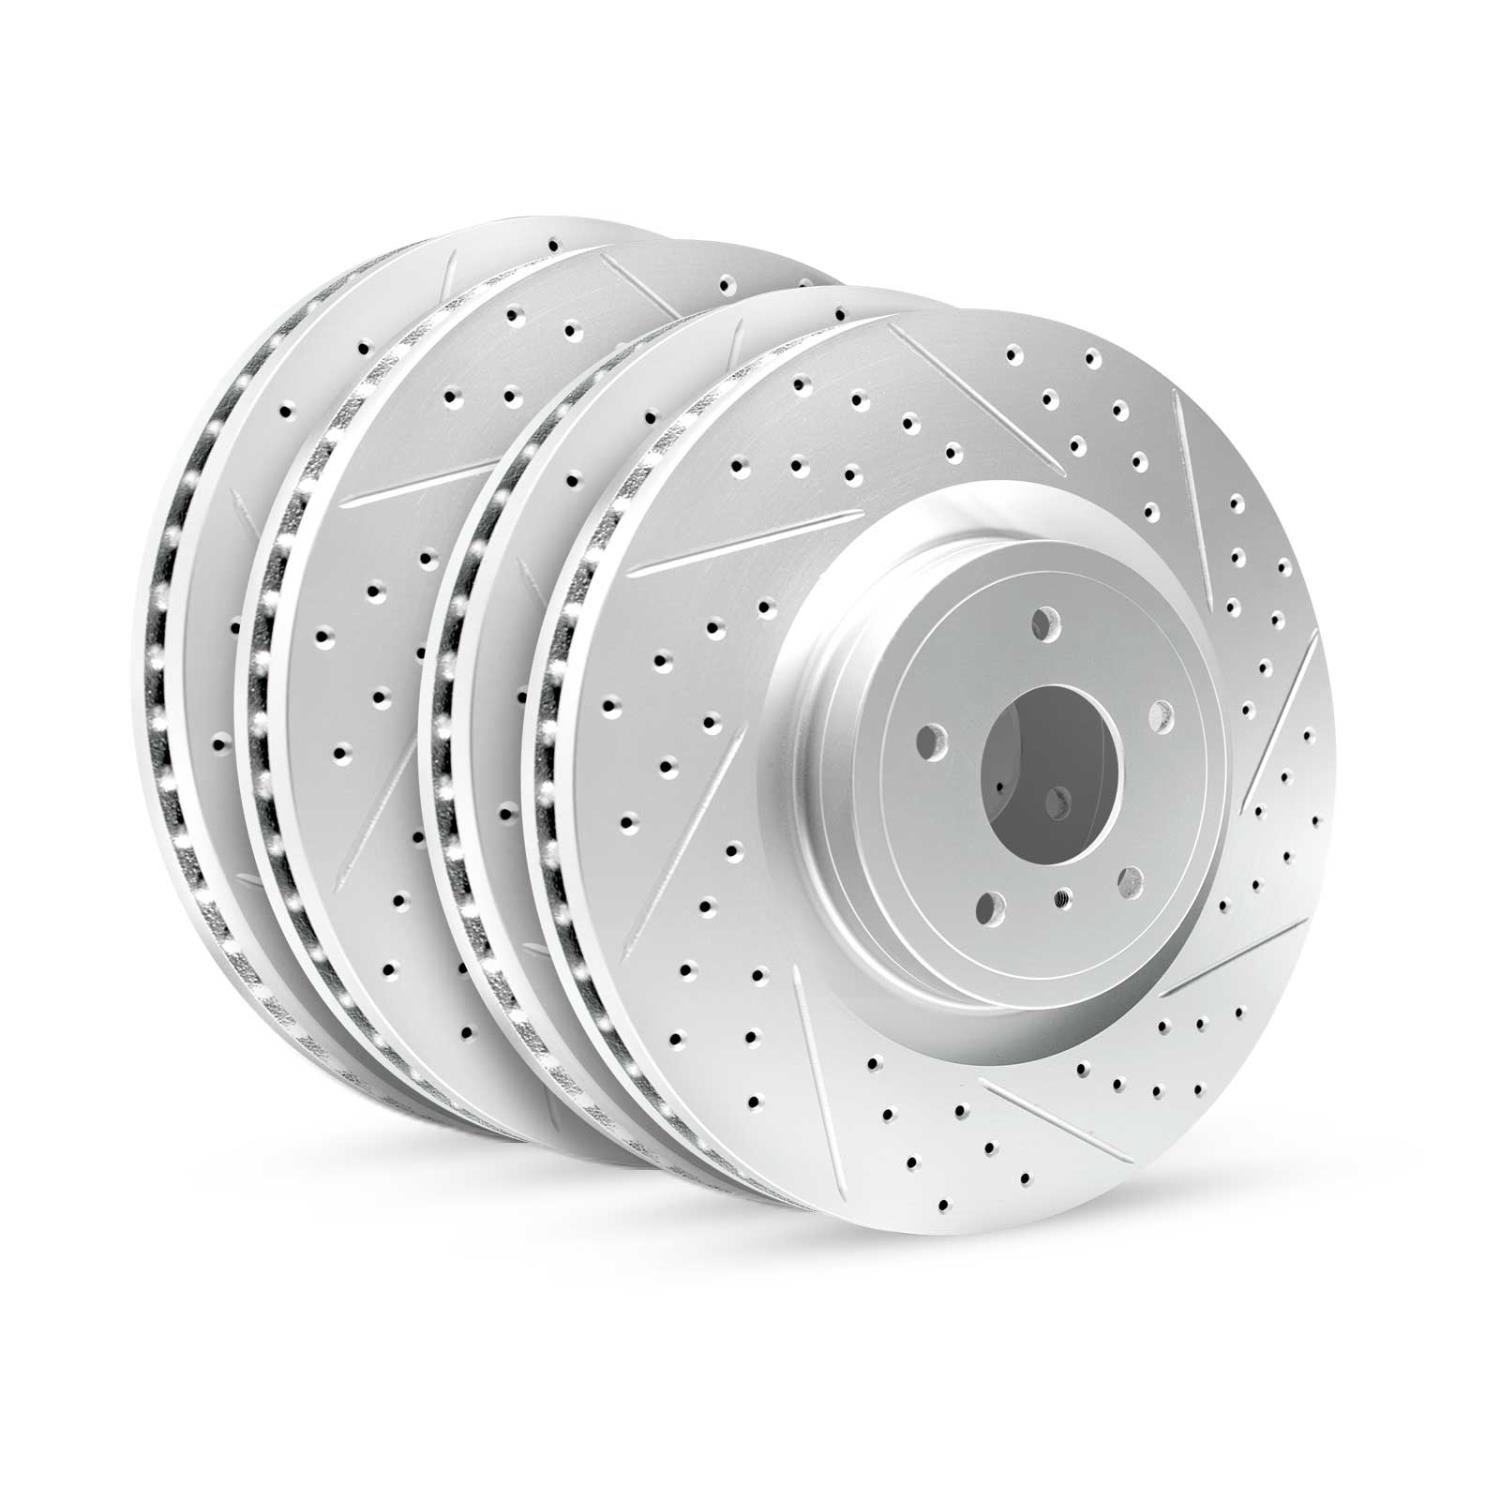 GEO-Carbon Drilled/Slotted Rotors, 2003-2008 Acura/Honda, Position: Front/Rear